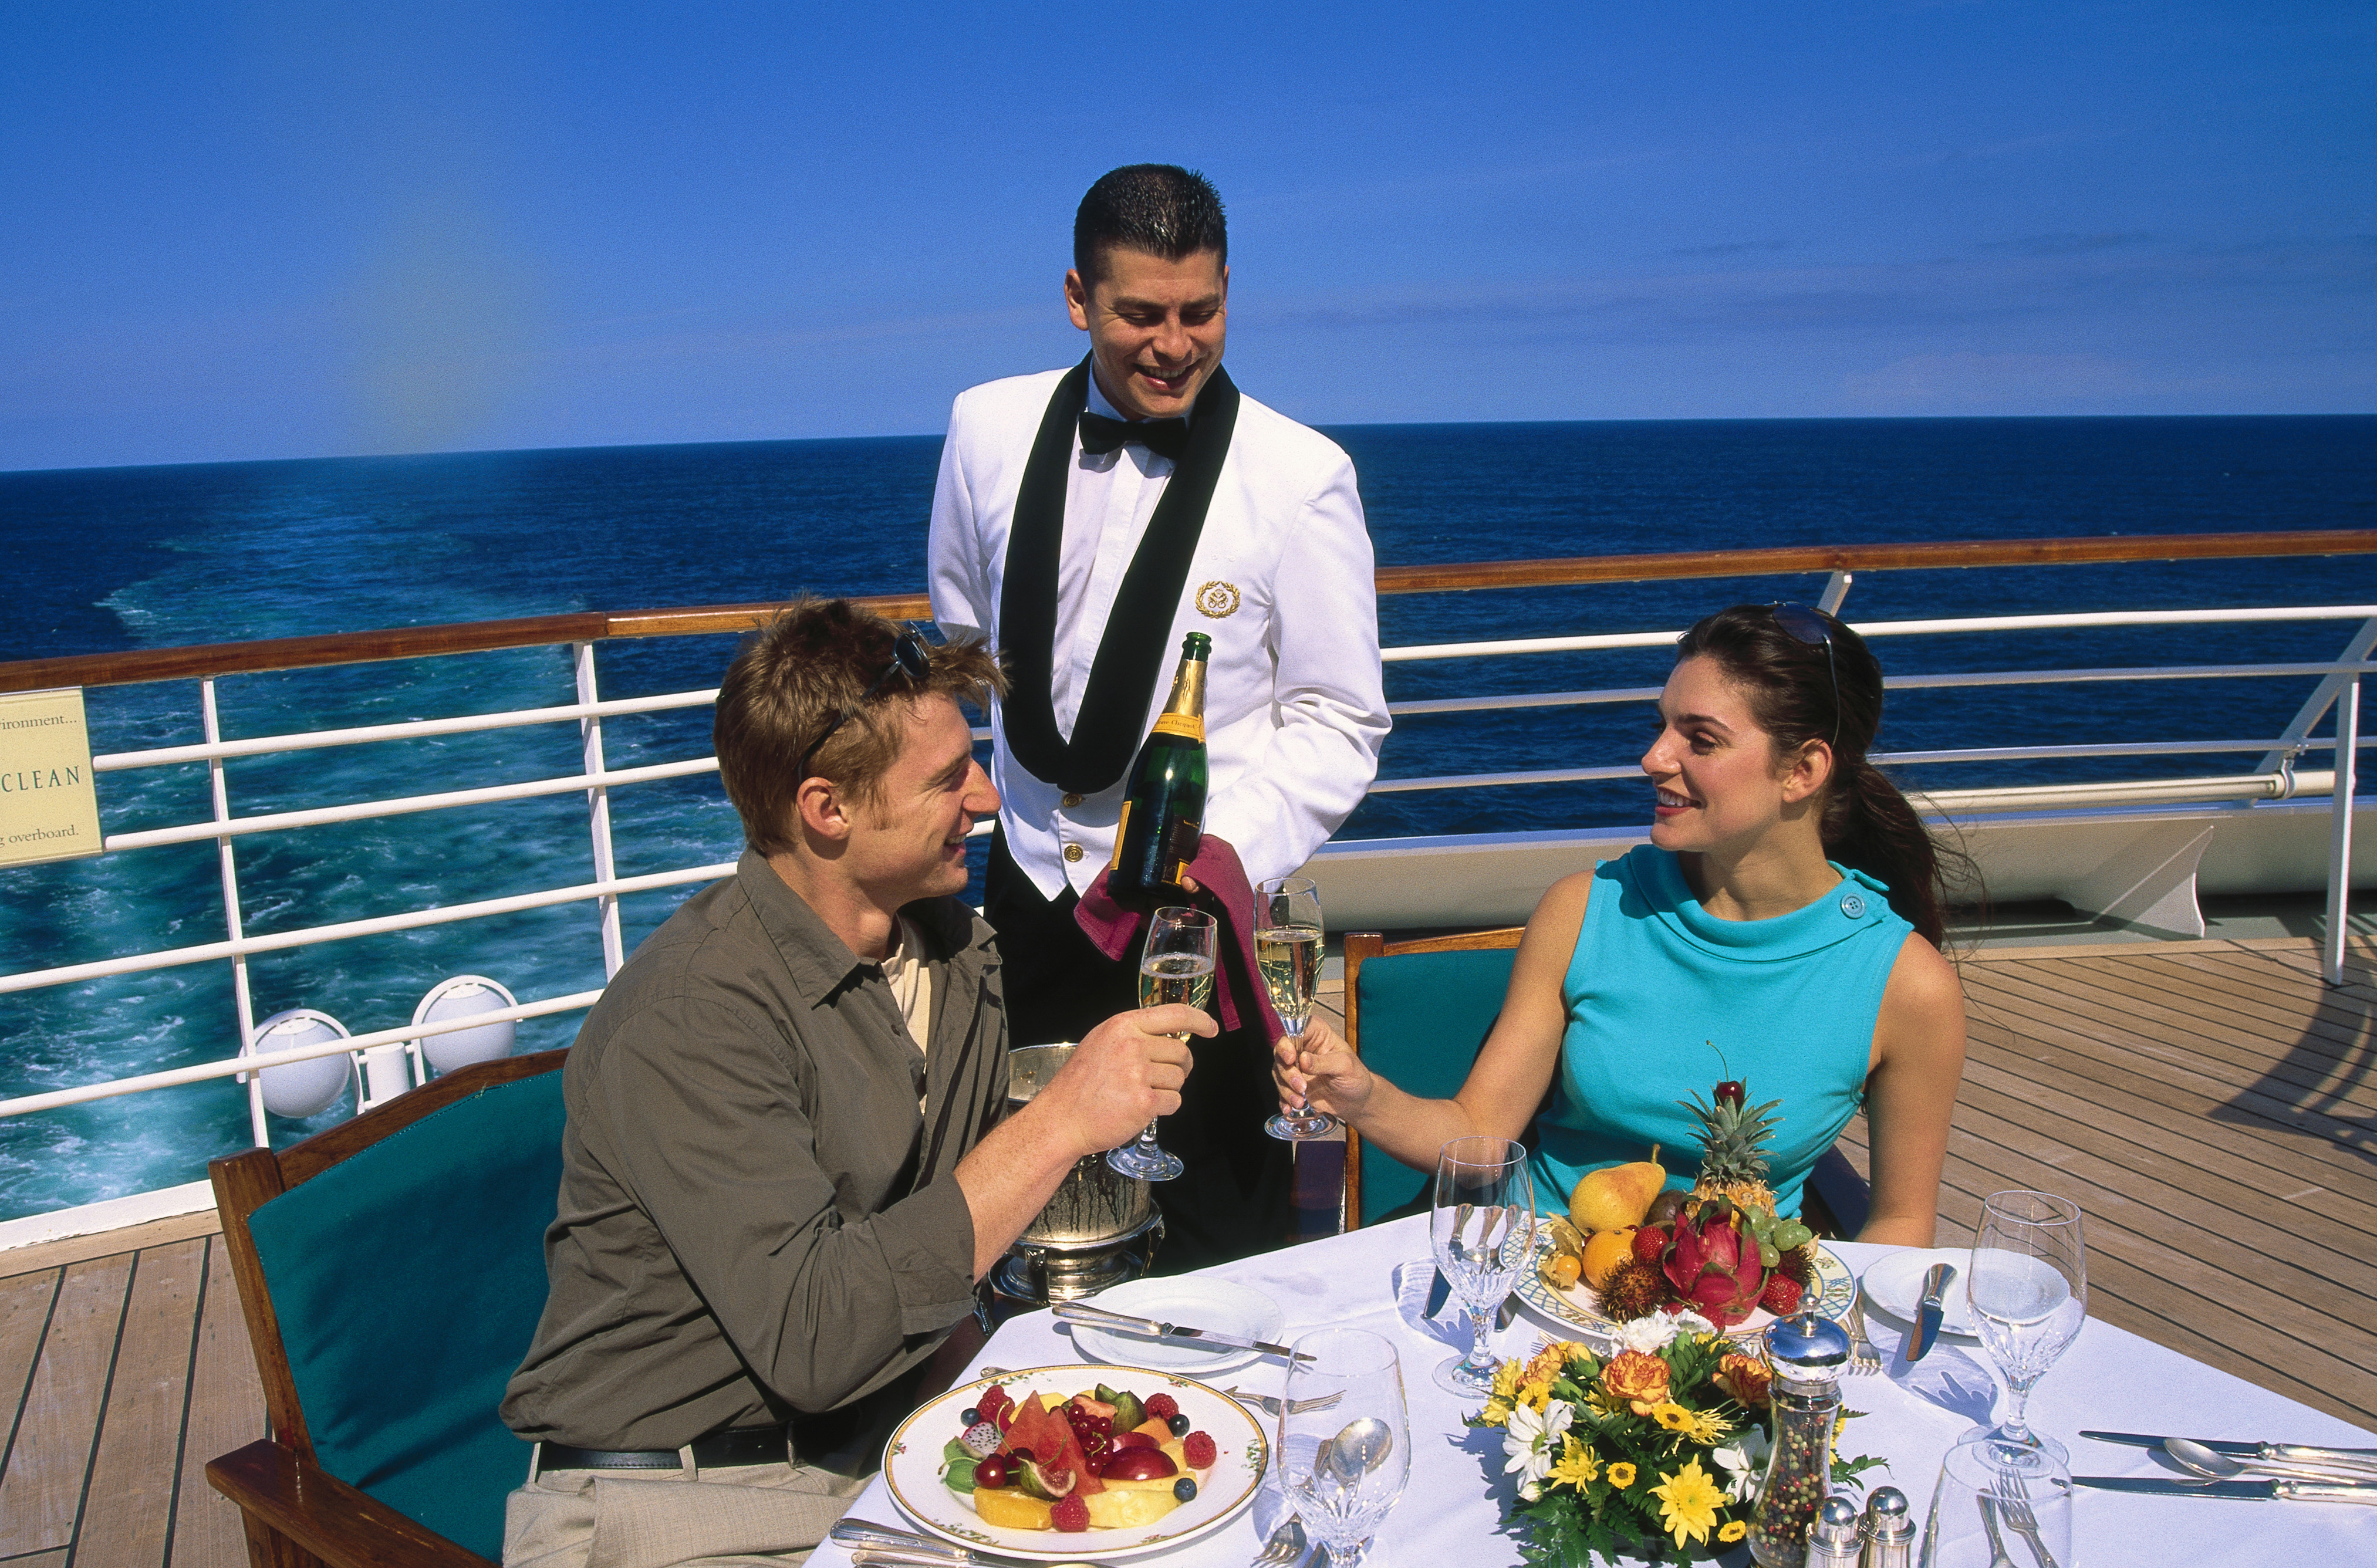 One crew member revealed that some 'newbie' passengers treat the cruise like an all-inclusive